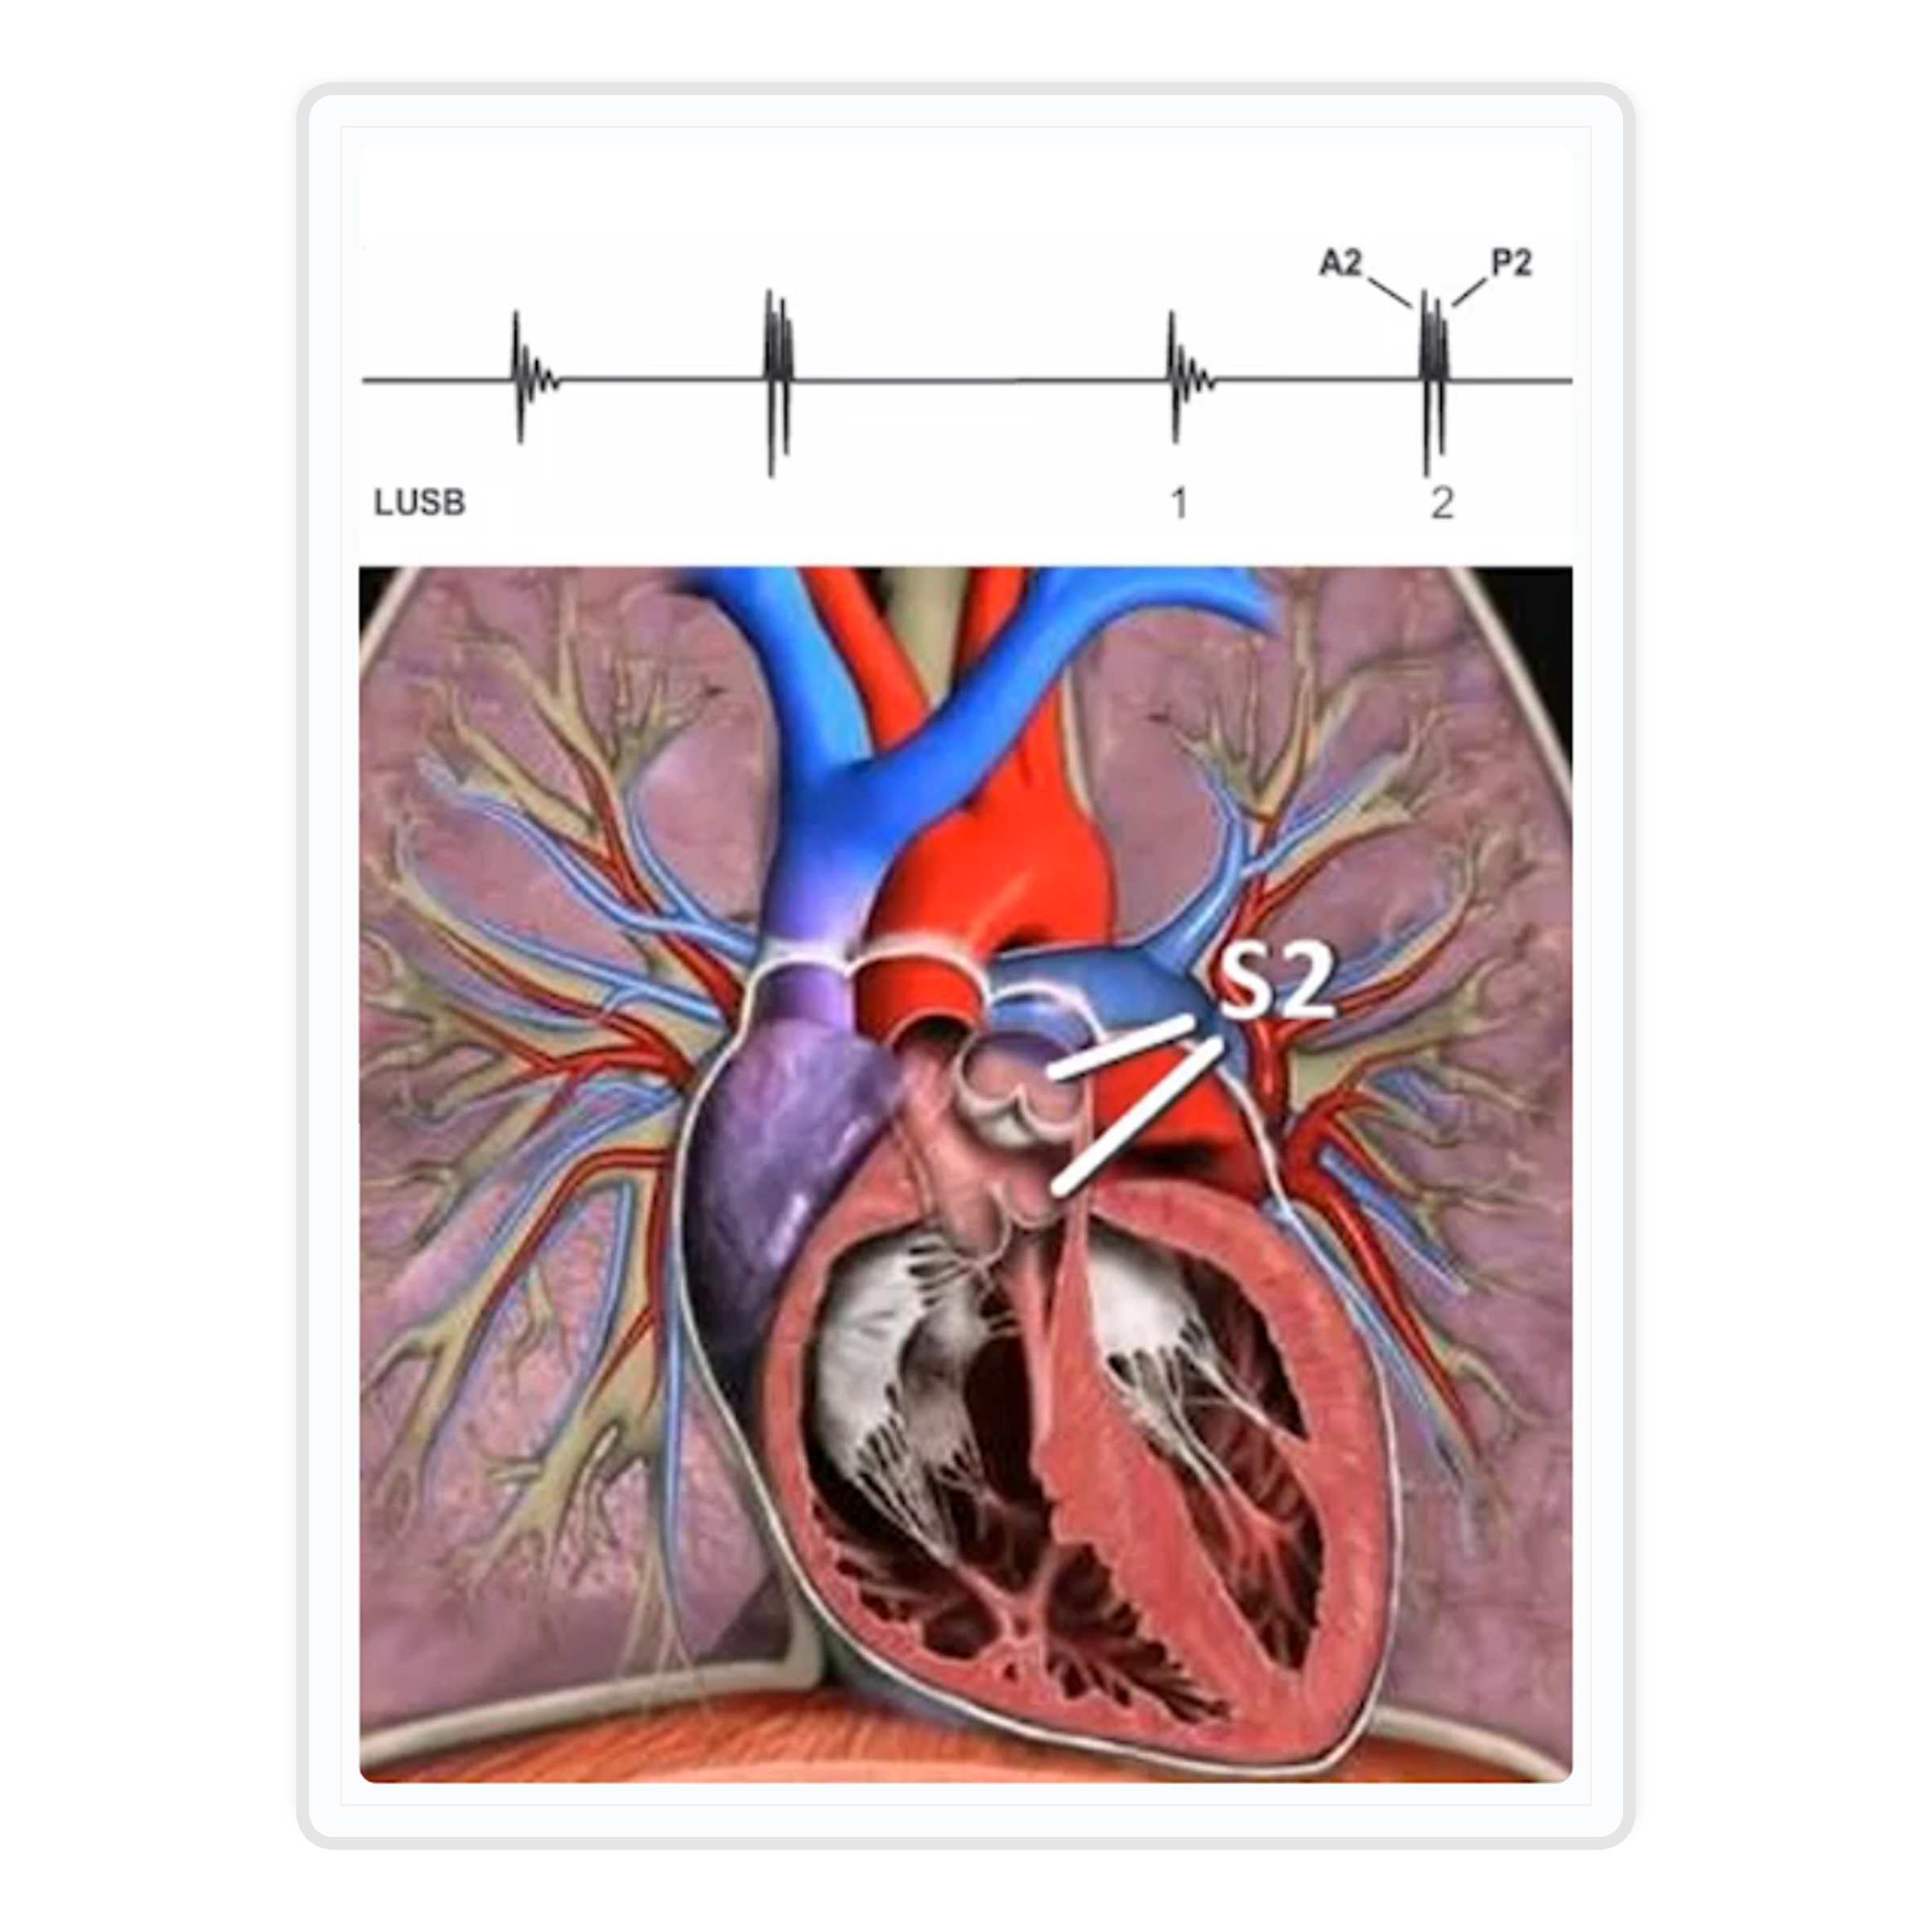 S2 placement on heart anatomy and LUSB